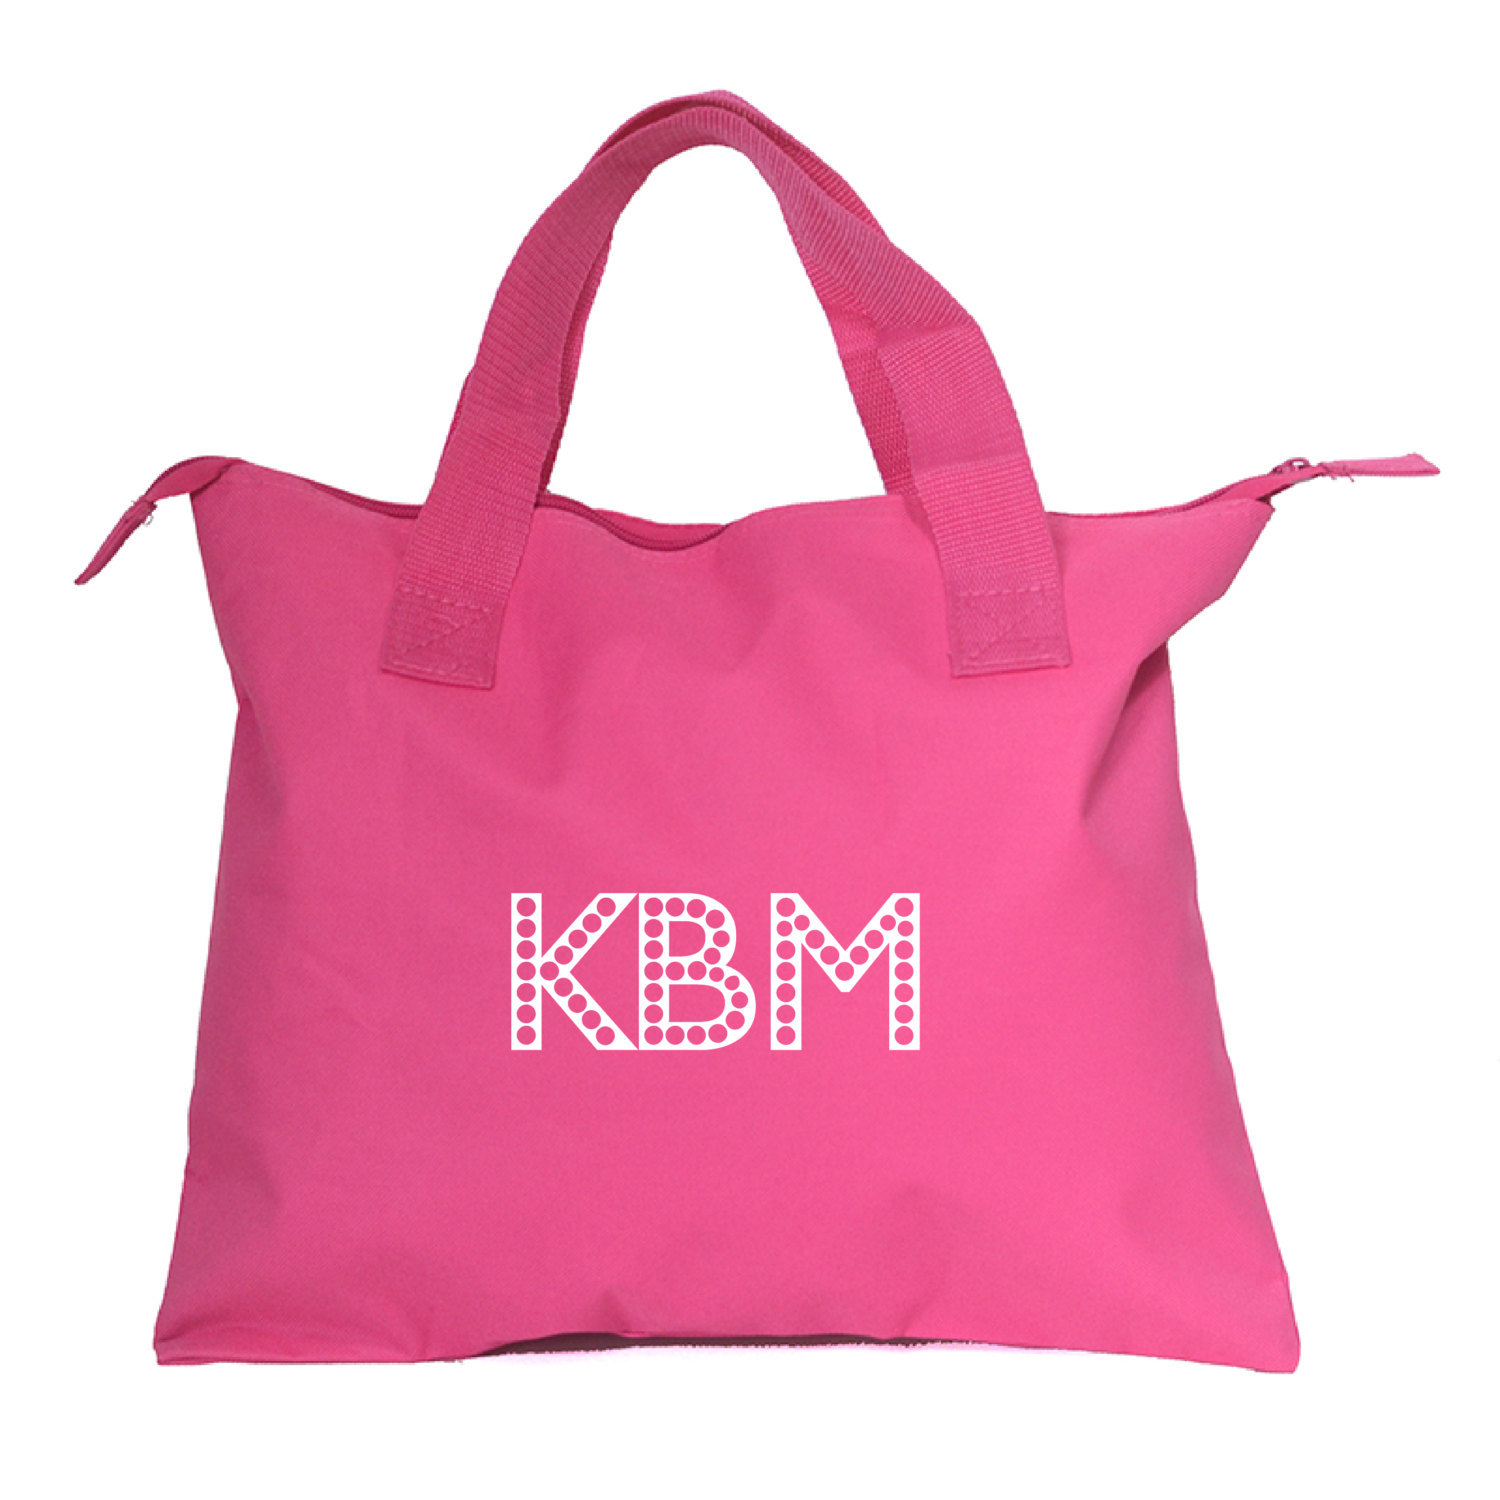 Personalized Kids Tote Bag